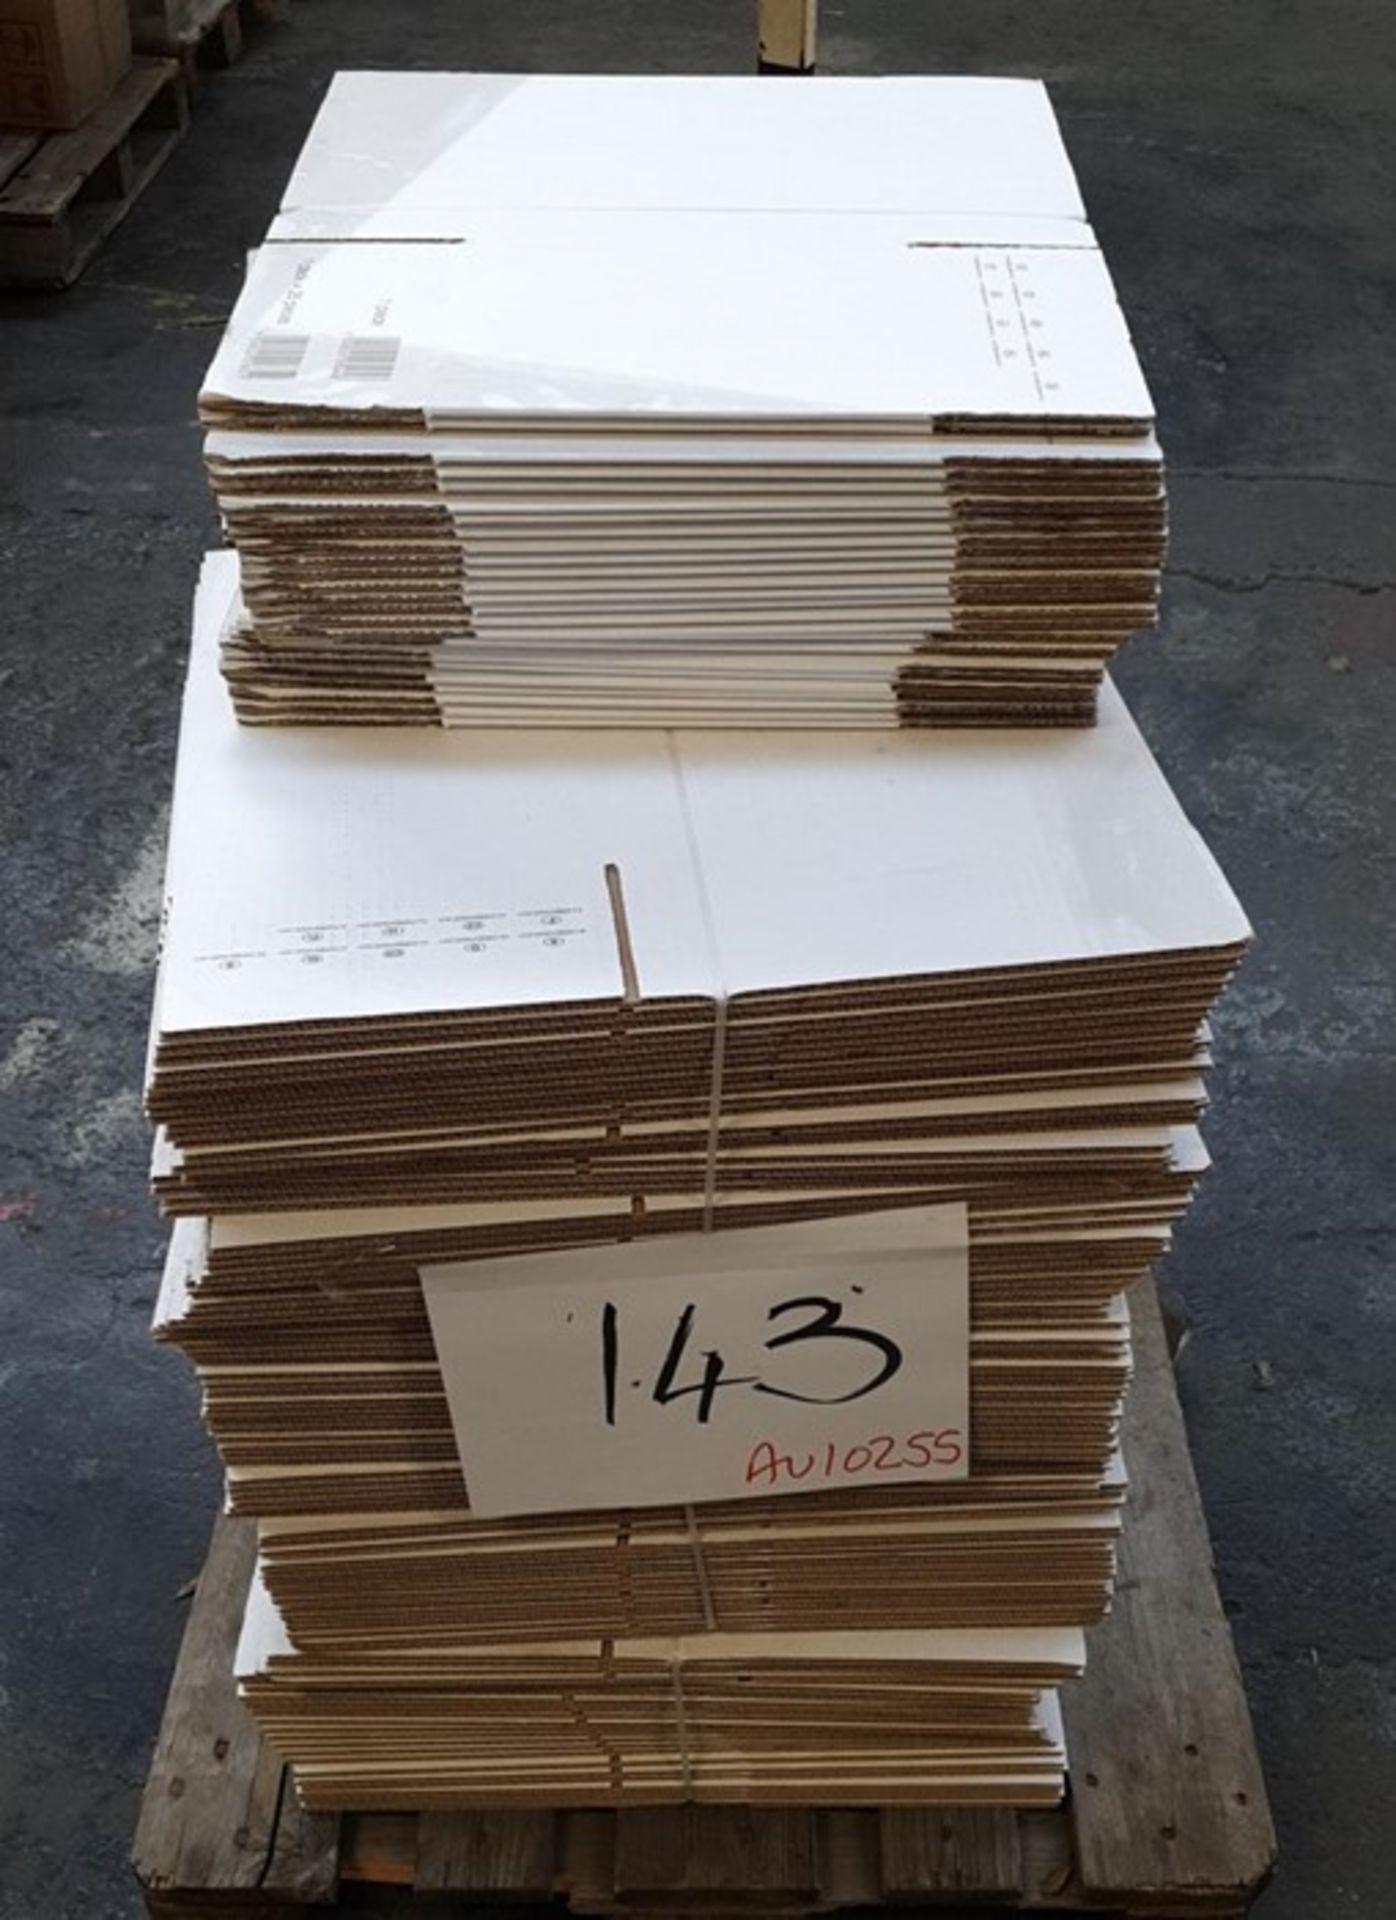 1 LOT TO CONTAIN APPROX 225 PRESSEL CARDBOARD BOXES - 310 X 220 X 250MM / PN - NPN (VIEWING HIGHLY